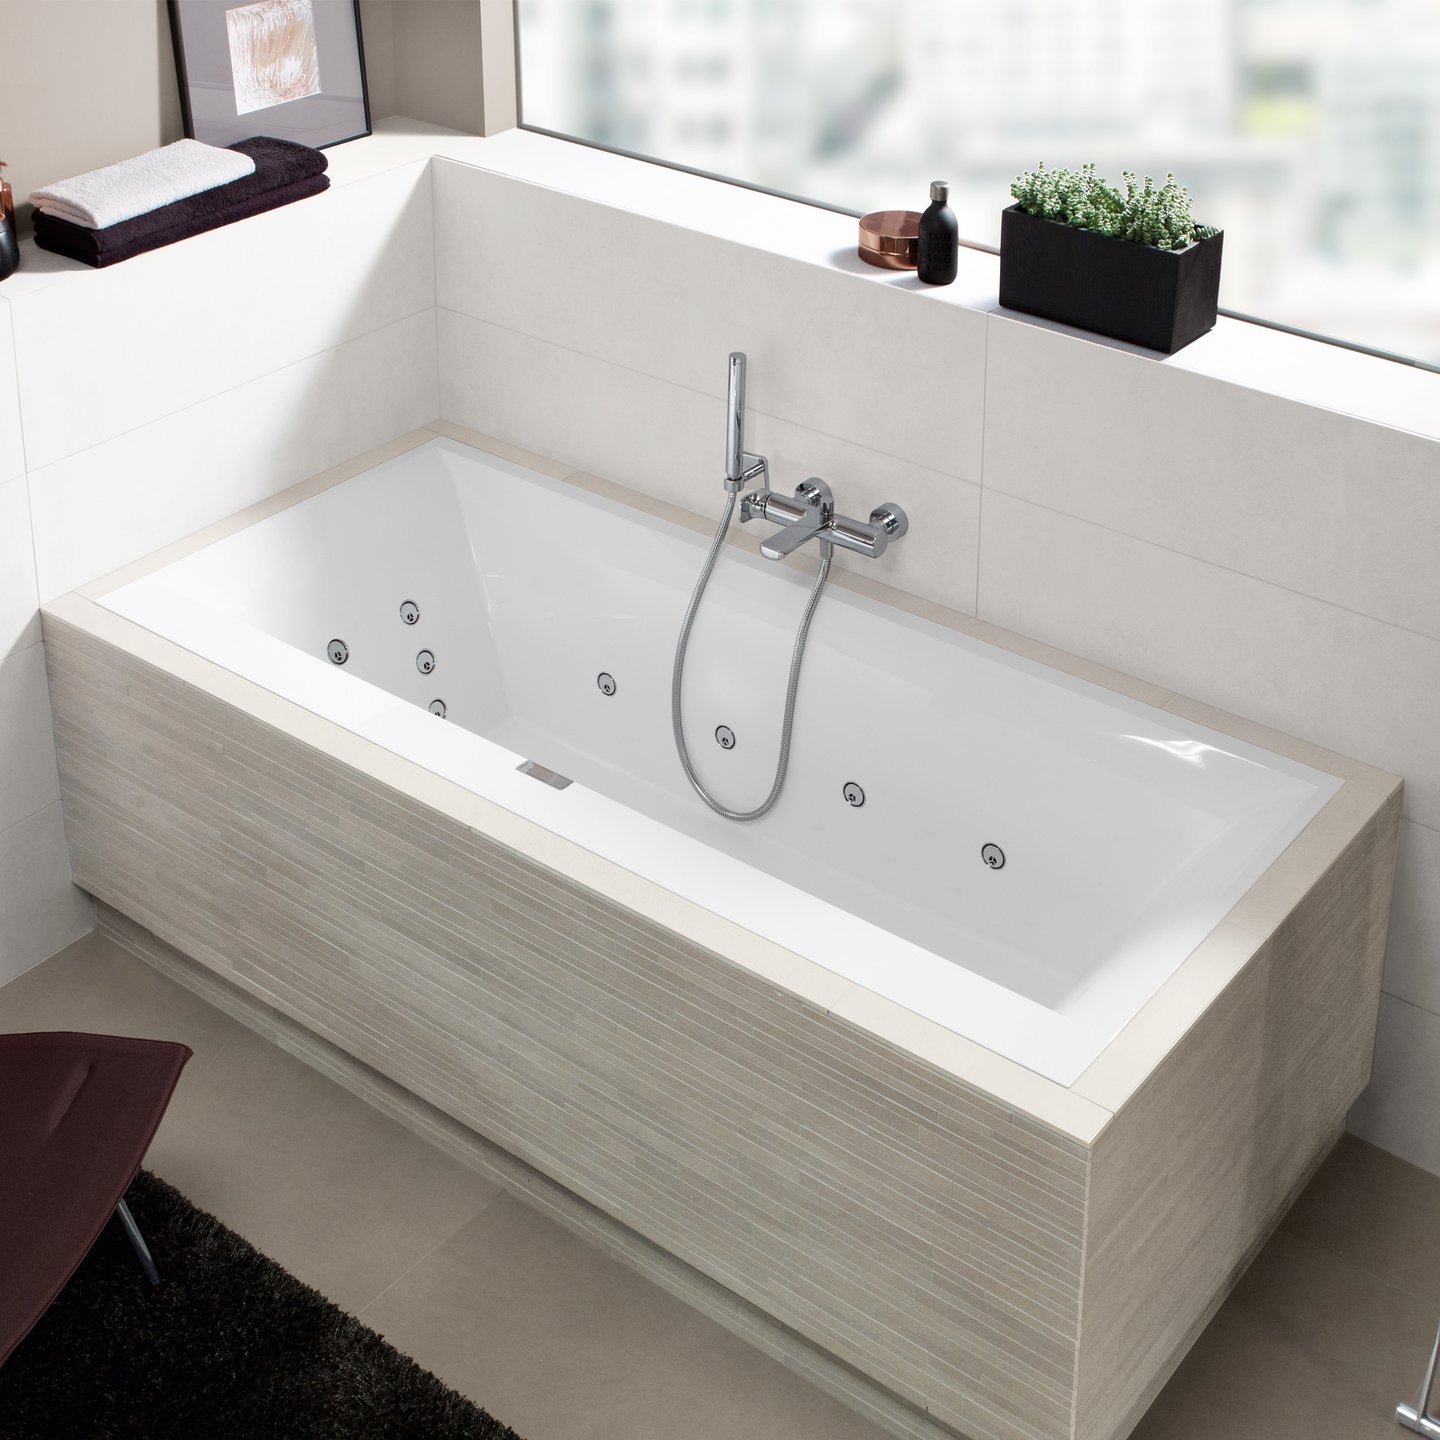 Kerel B.C. Scepticisme Villeroy & Boch Squaro Edge 12 Duo rectangular whirlbath, built-in white,  with Special CombiPool Active, with bath filler - UAP180SQE2B1V01 | REUTER